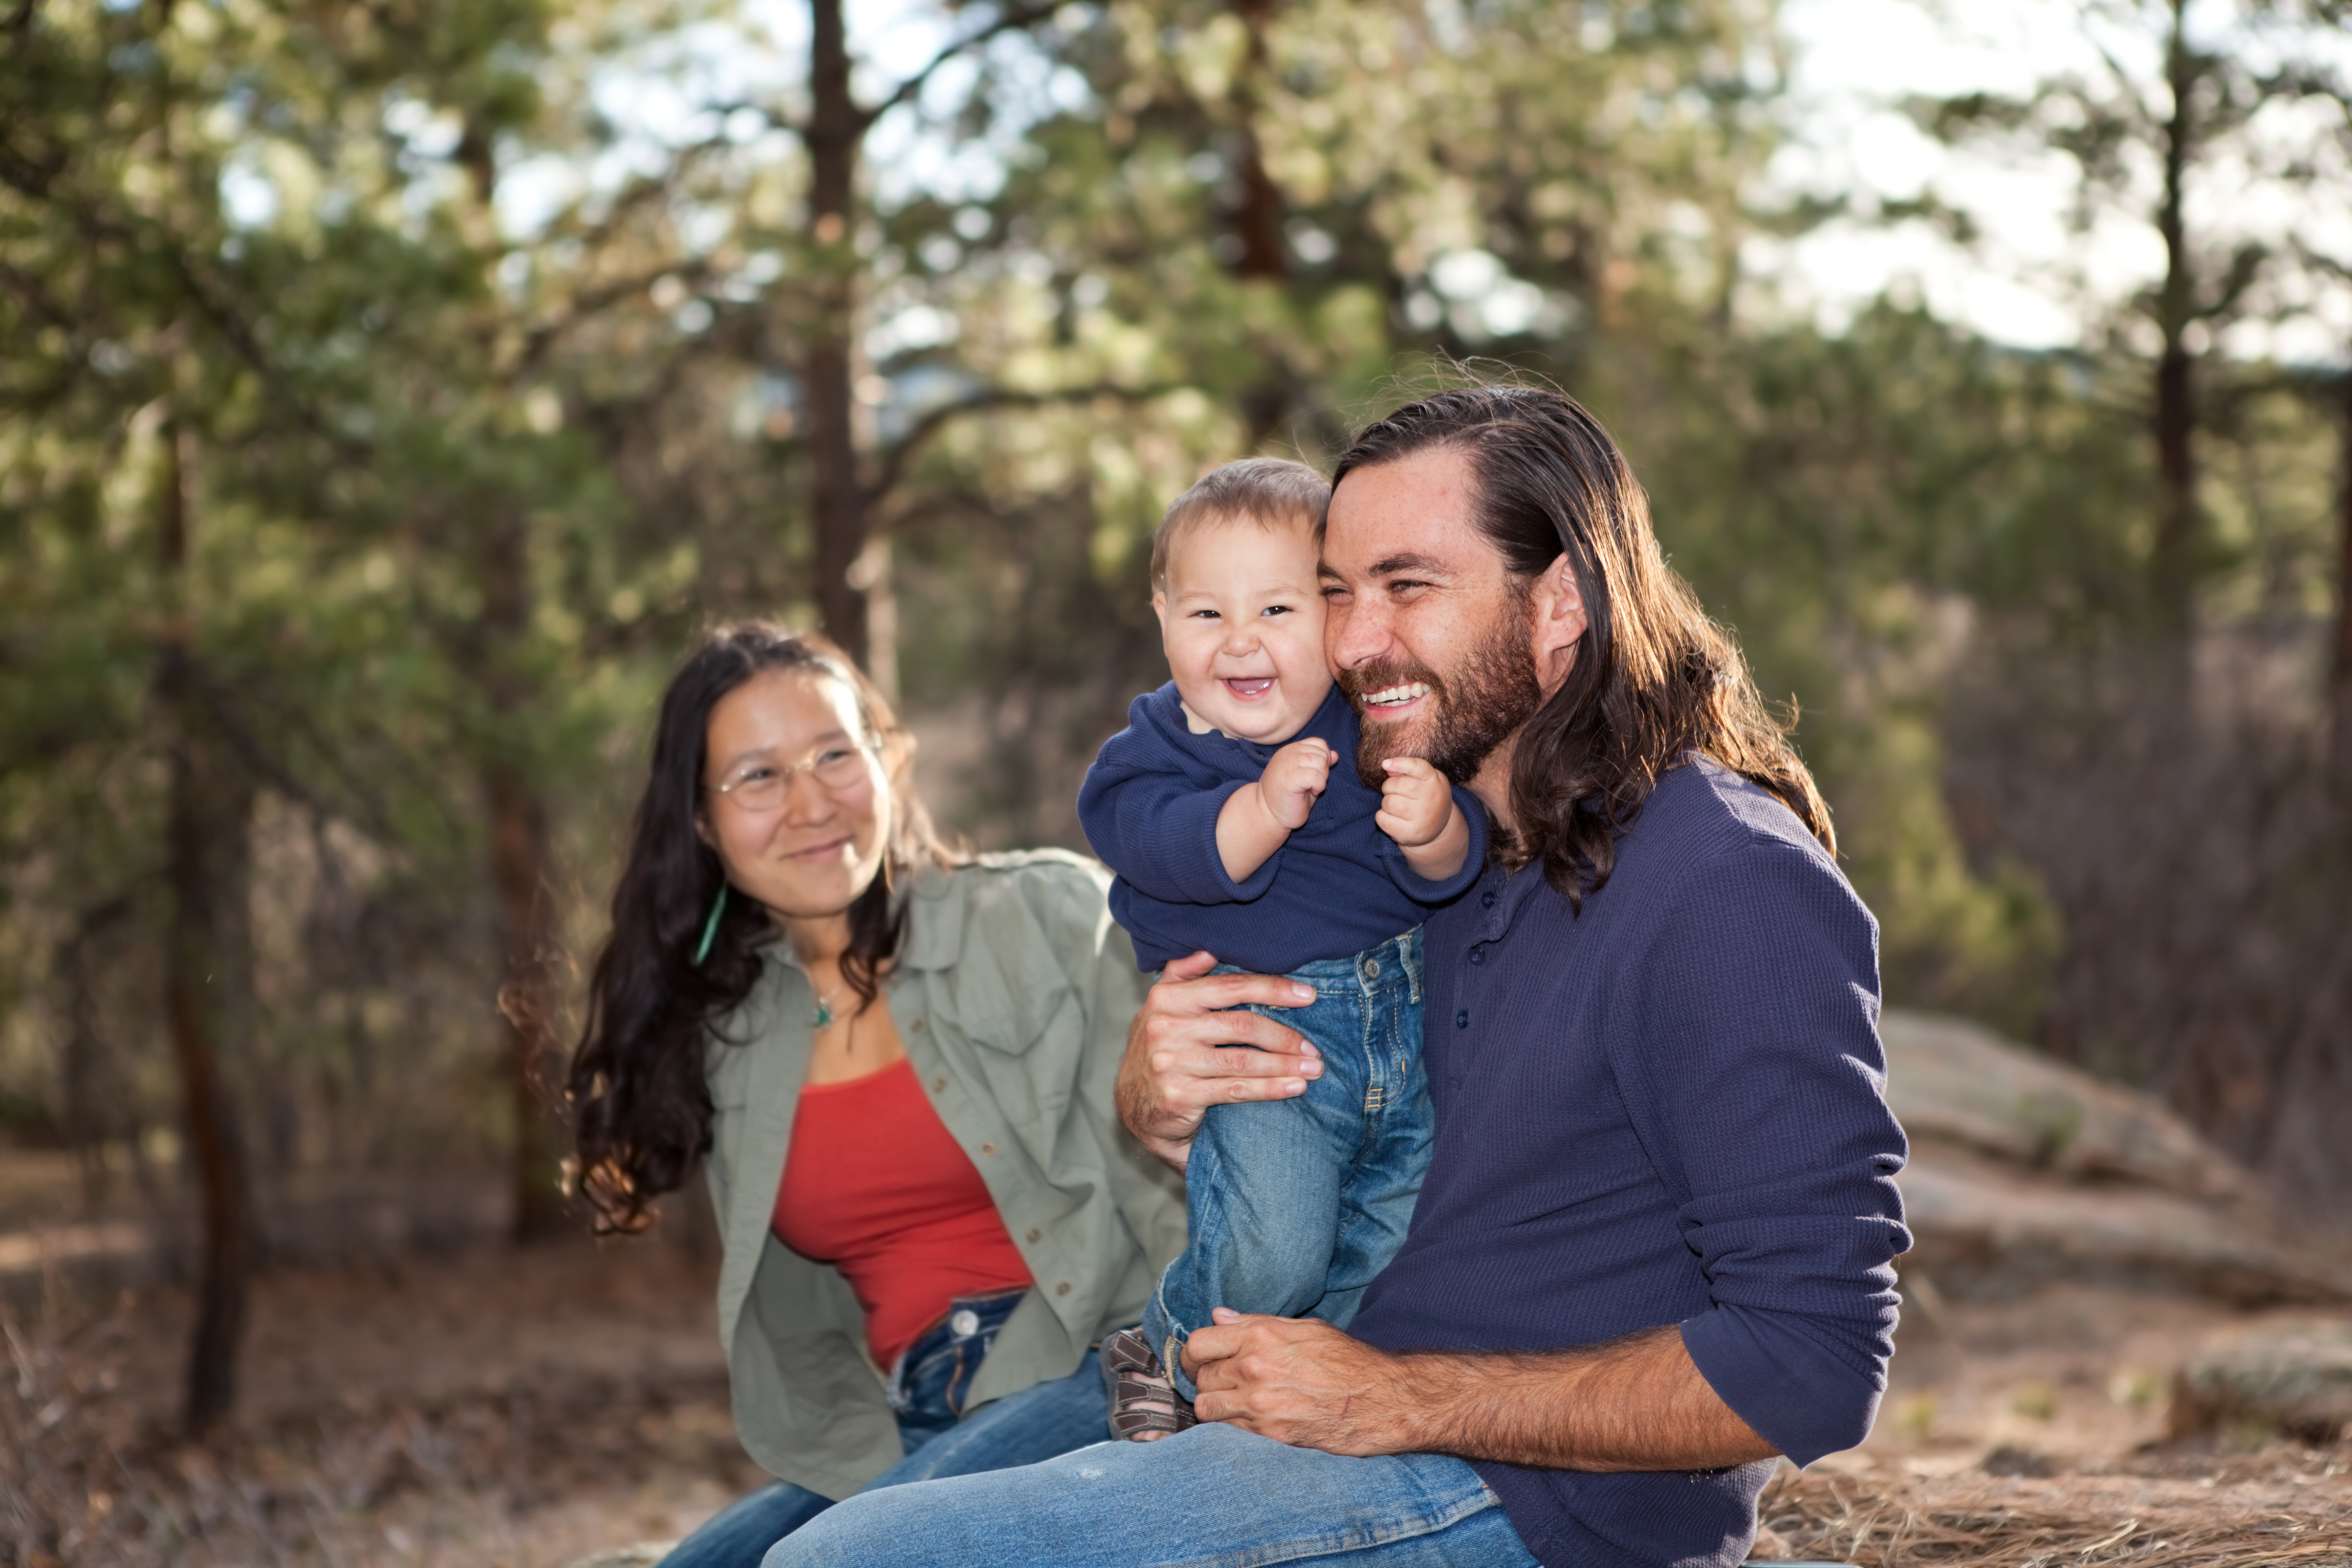 A Native American family laughing and smiling together